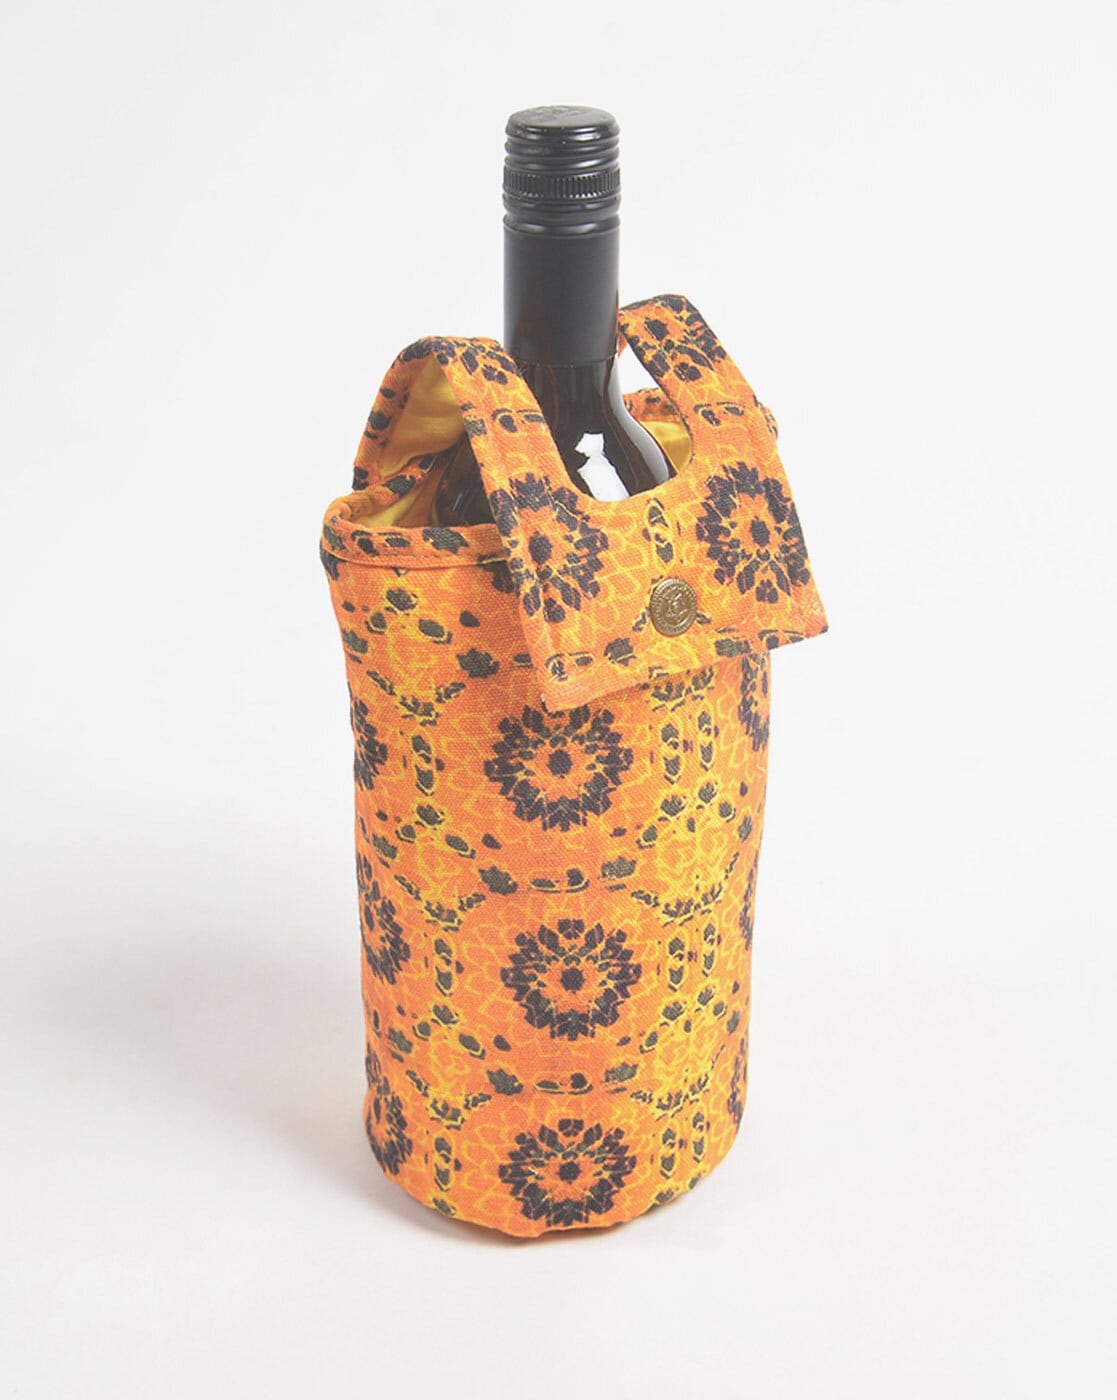 NWT/D (Minor) Primewear Insulated Wine Bottle Purse-Candy Blue Faux Patent  Leath | eBay